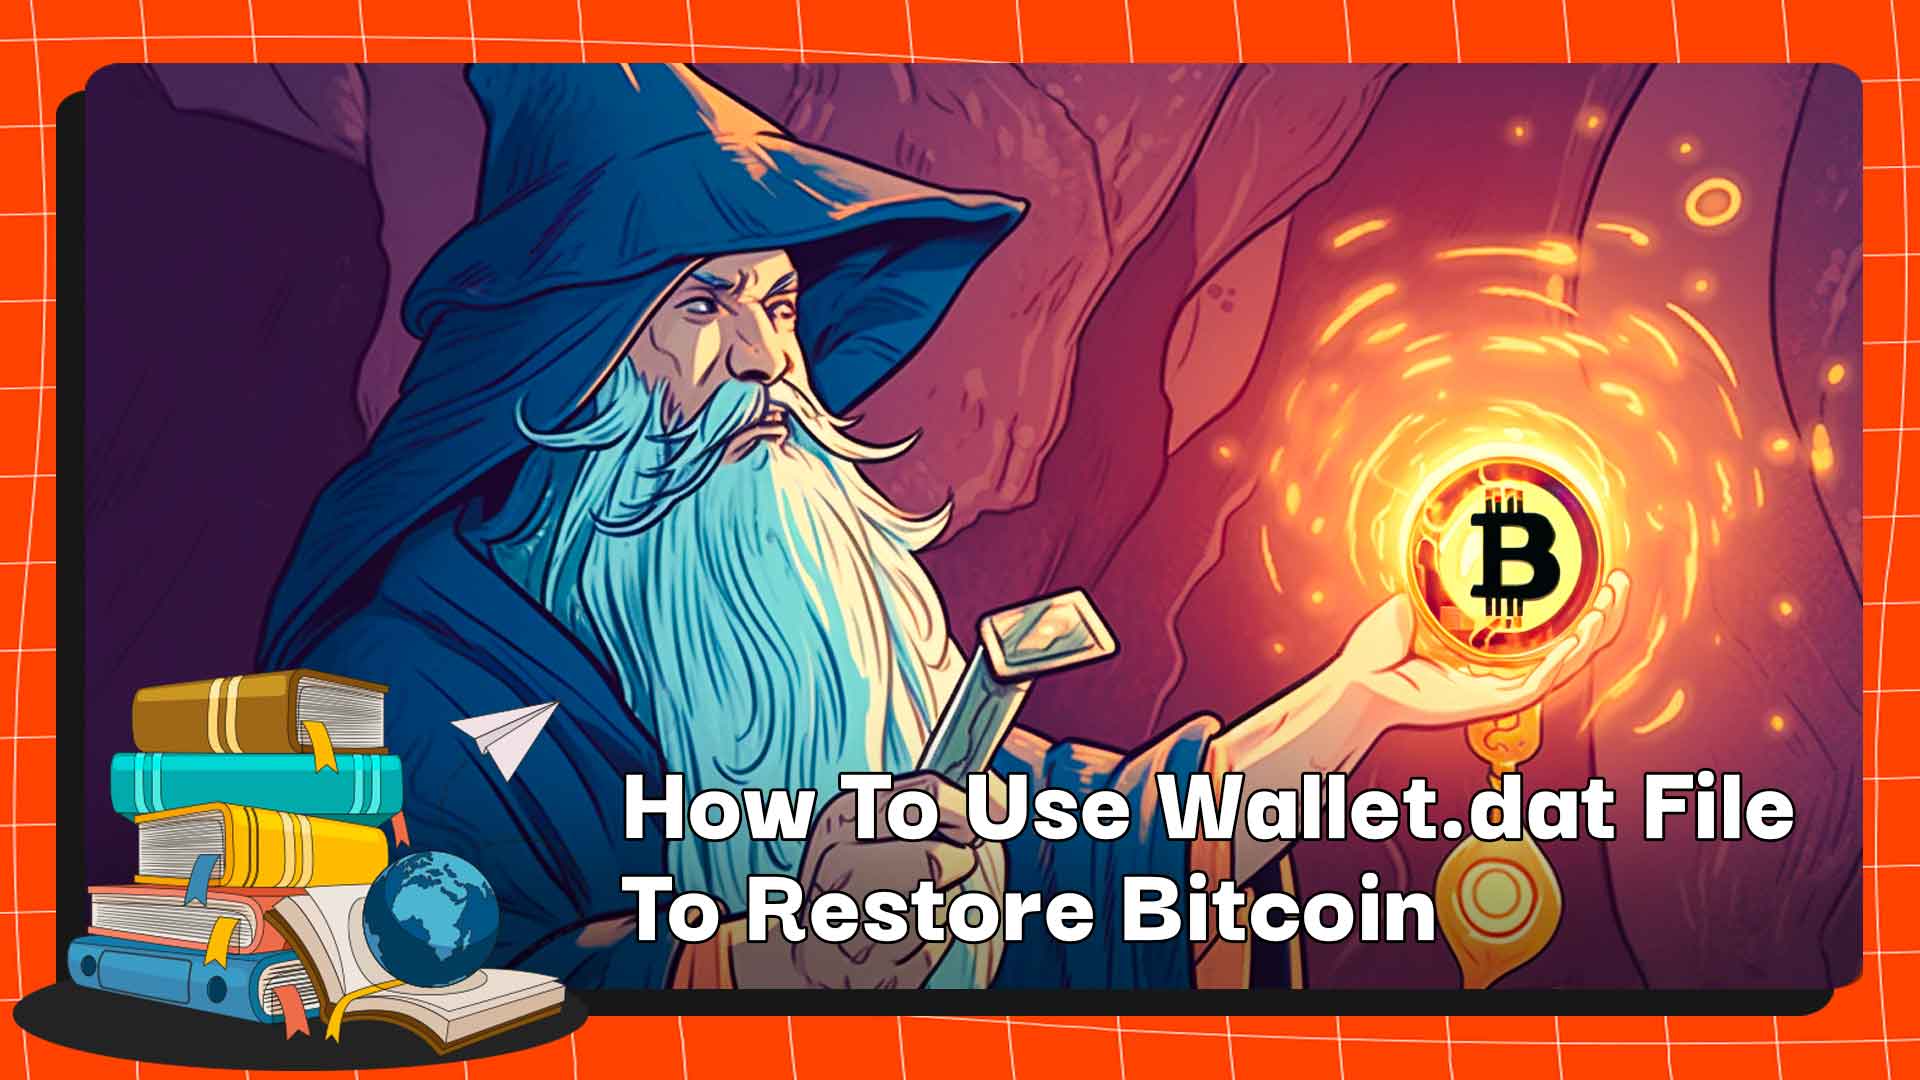 How I found and cashed in a bitcoin wallet from · Fabian Kostadinov